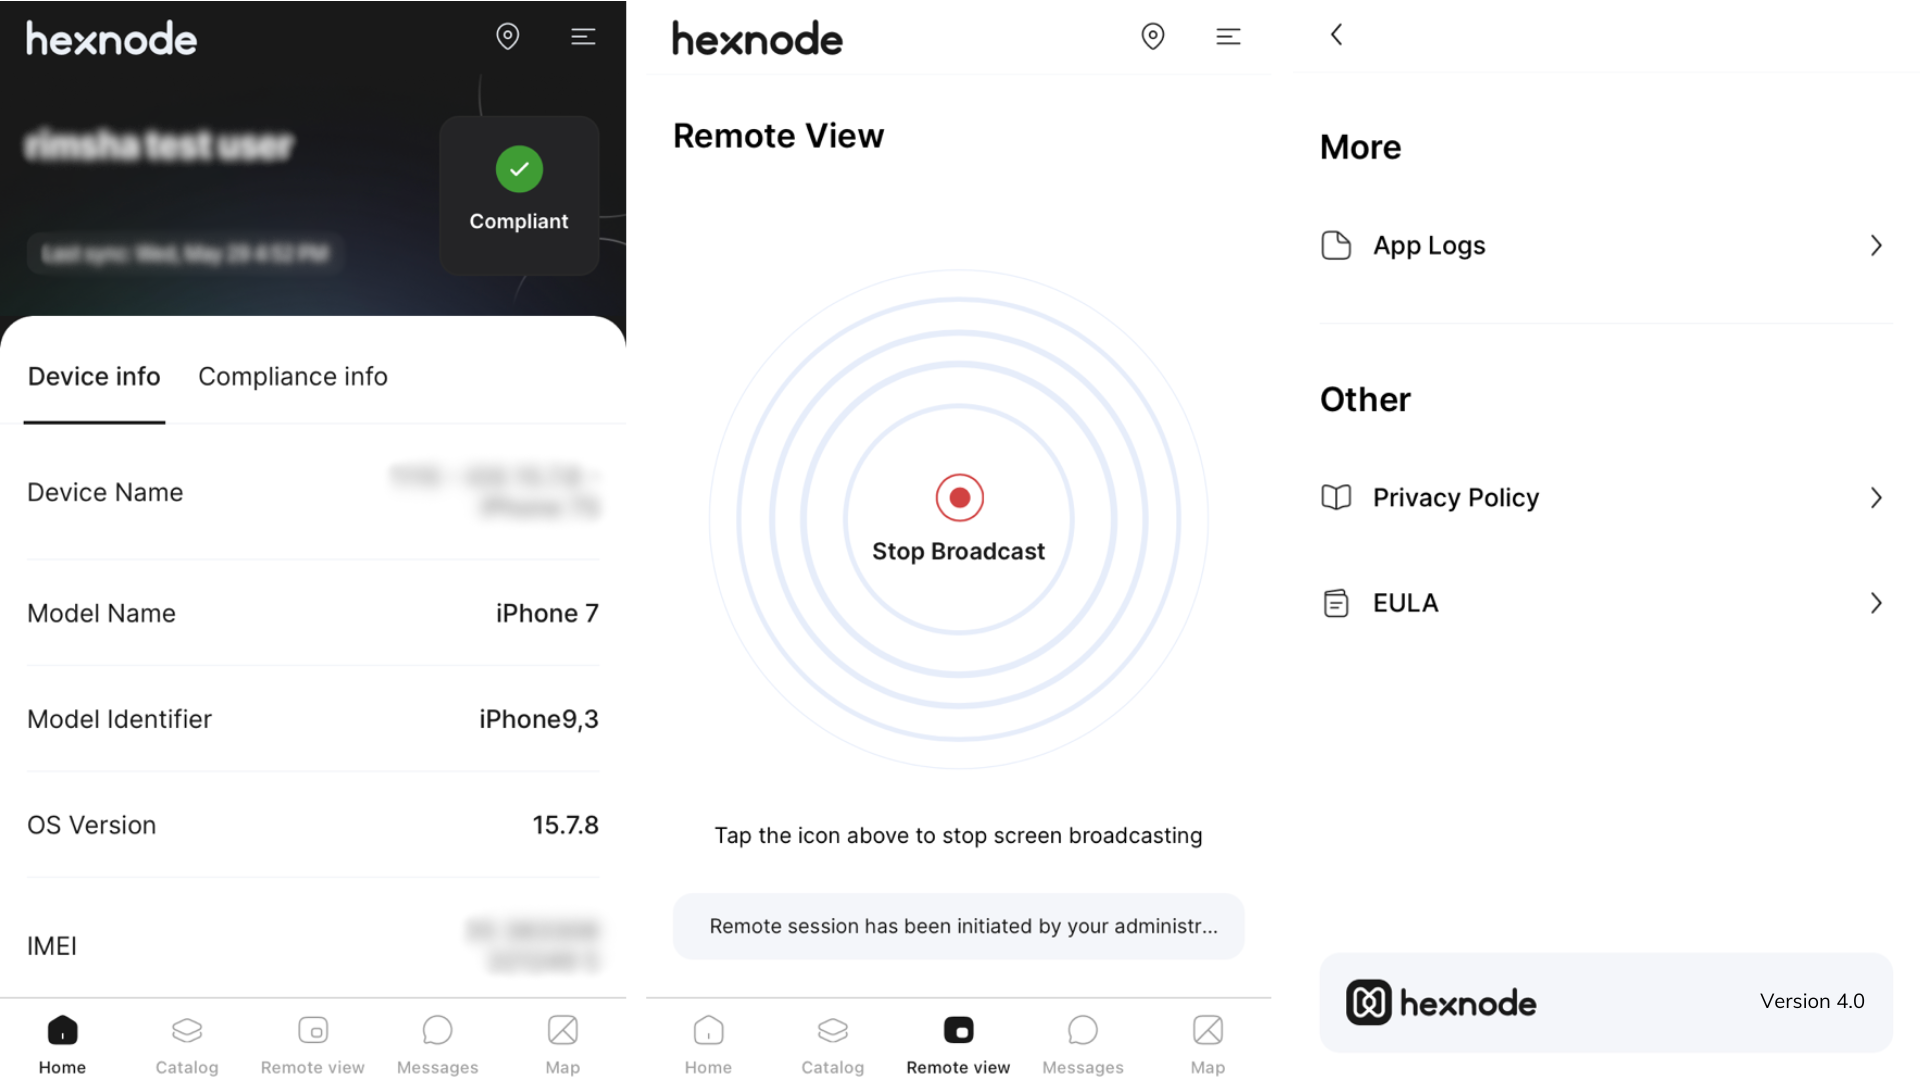 The new Hexnode UEM app for iOS